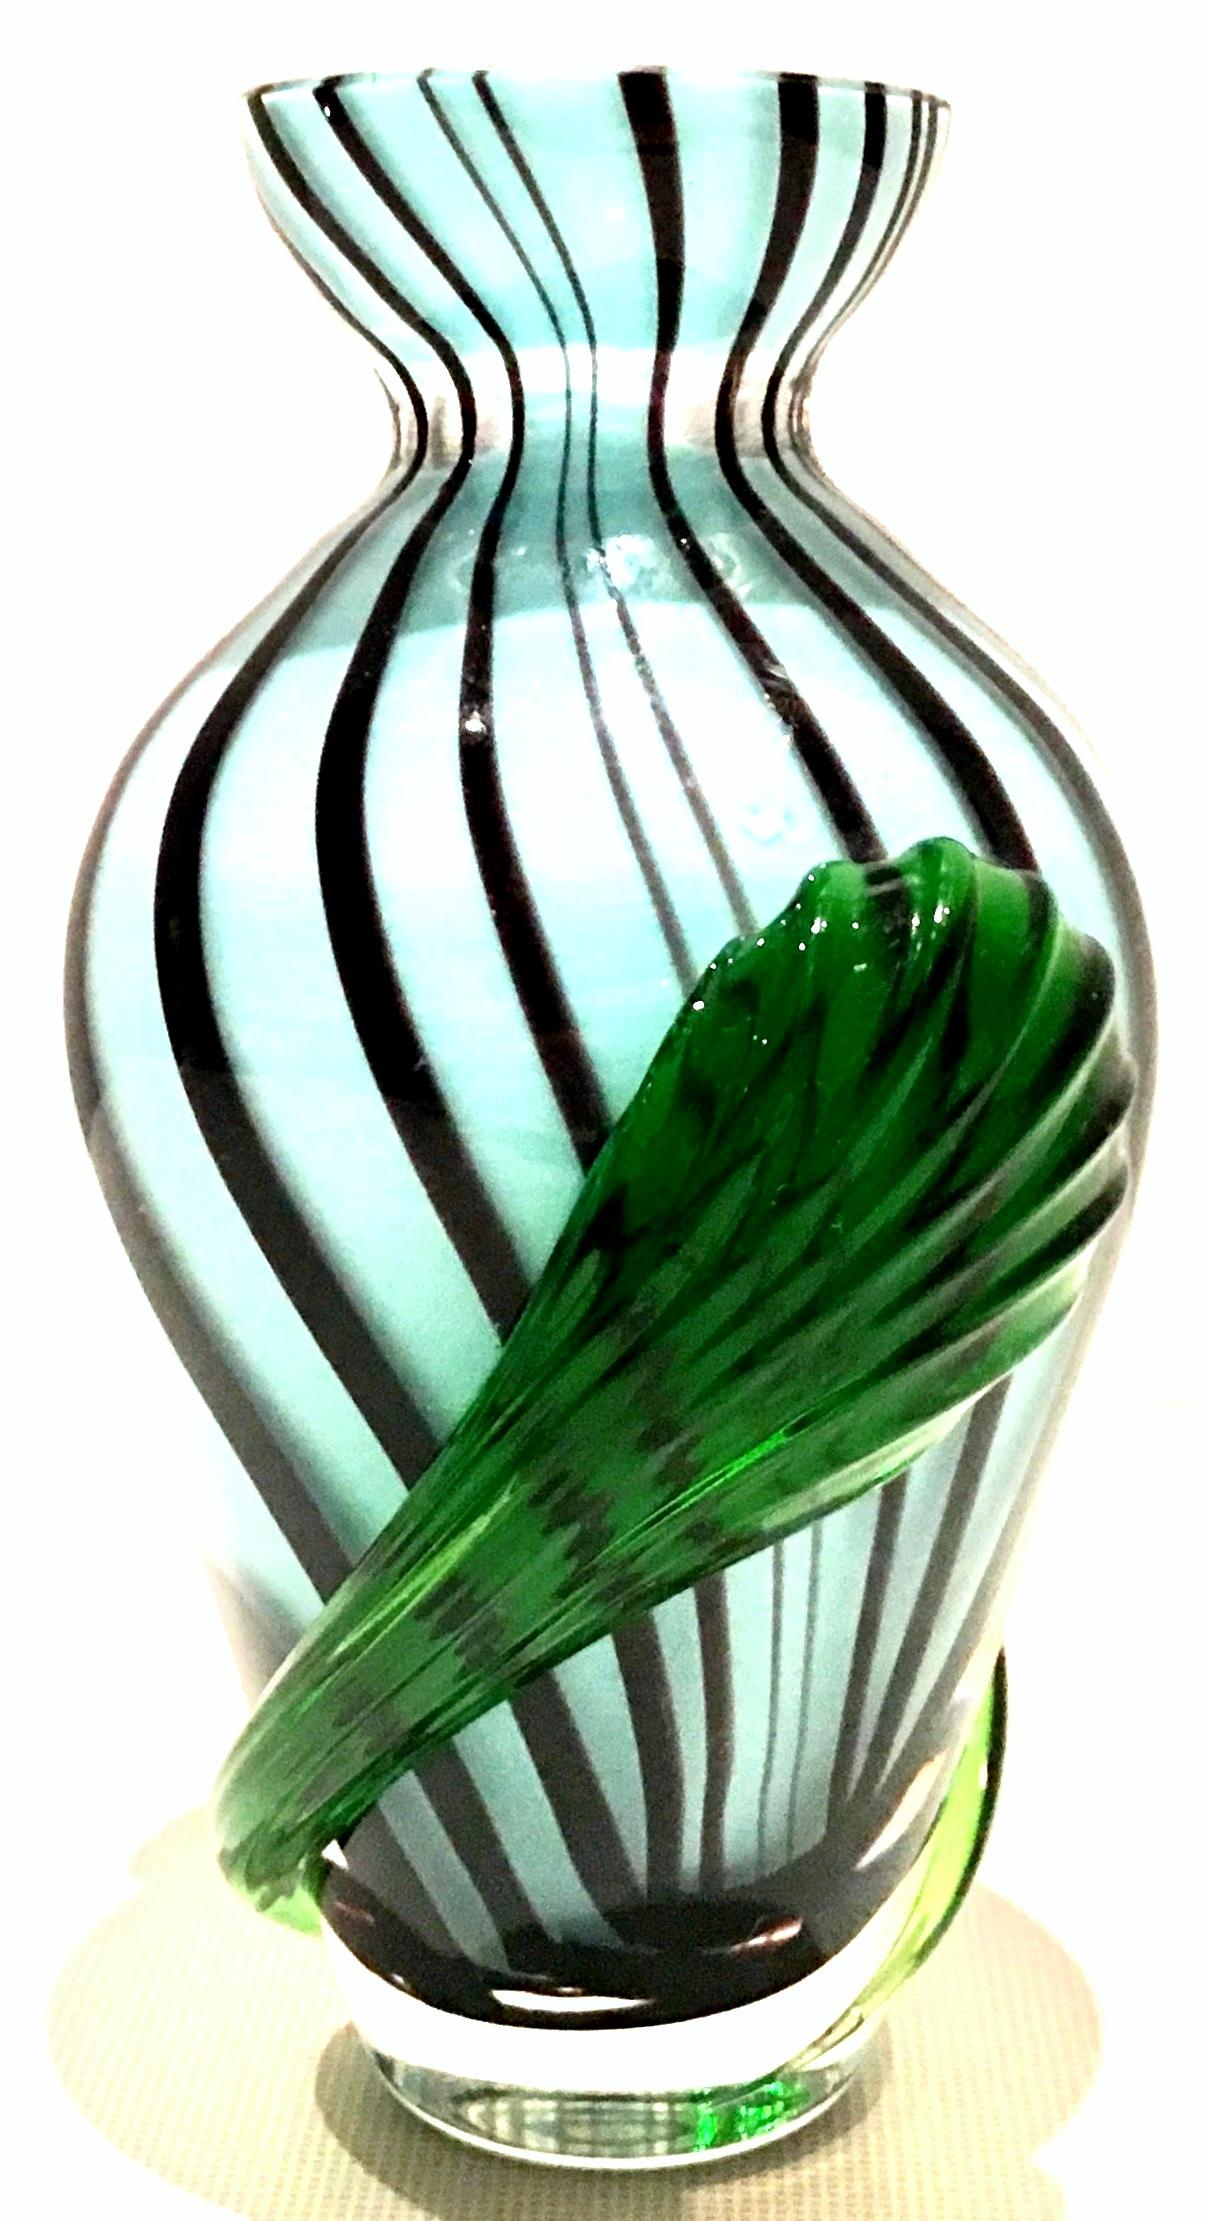 20th century unique Italian Murano glass light blue and black pinwheel bud vase with emerald green applied detail. Approximate circumference, 4